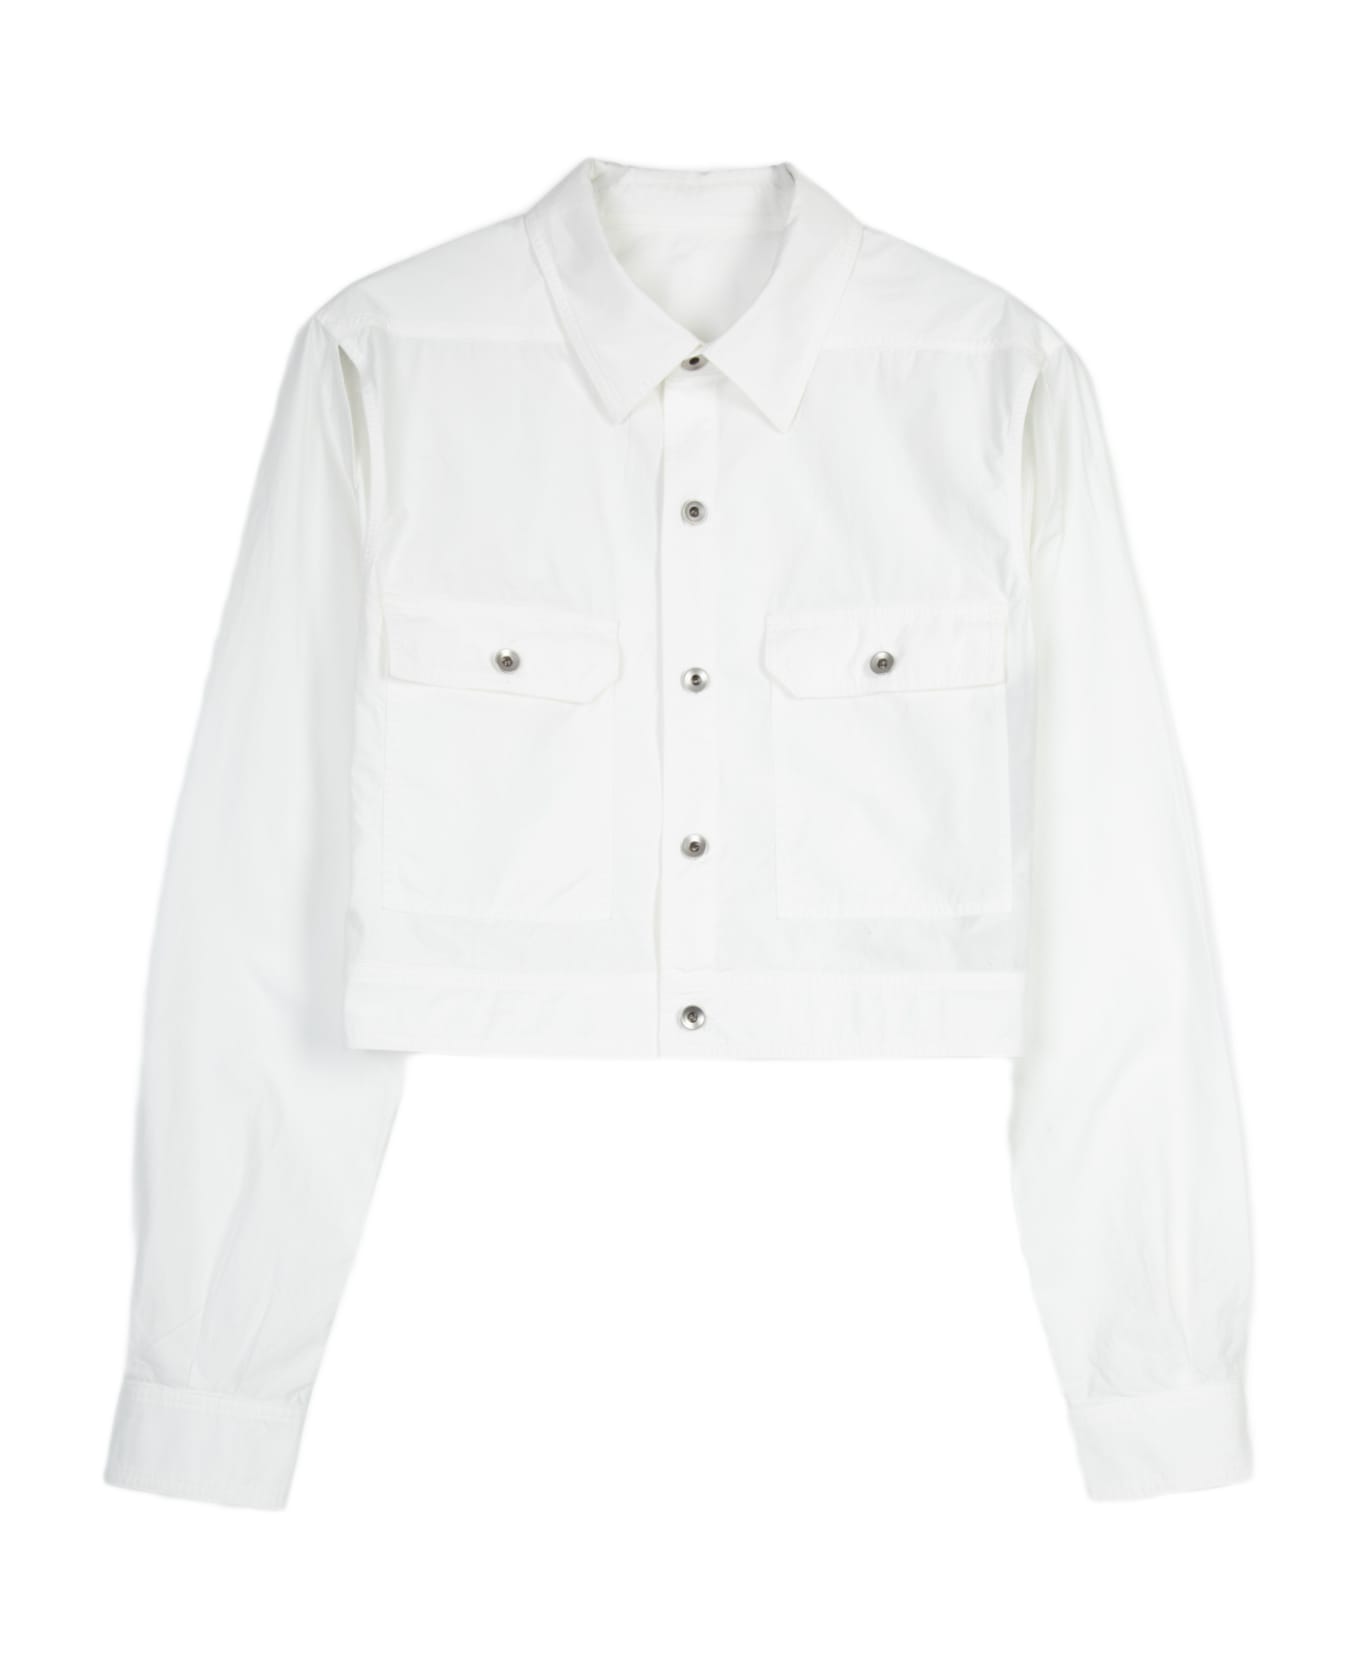 DRKSHDW Cape Sleeve Cropped Outershirt White Poplin Cotton Outershirt - Cape Sleeve Cropped Outershirt - White ジャケット